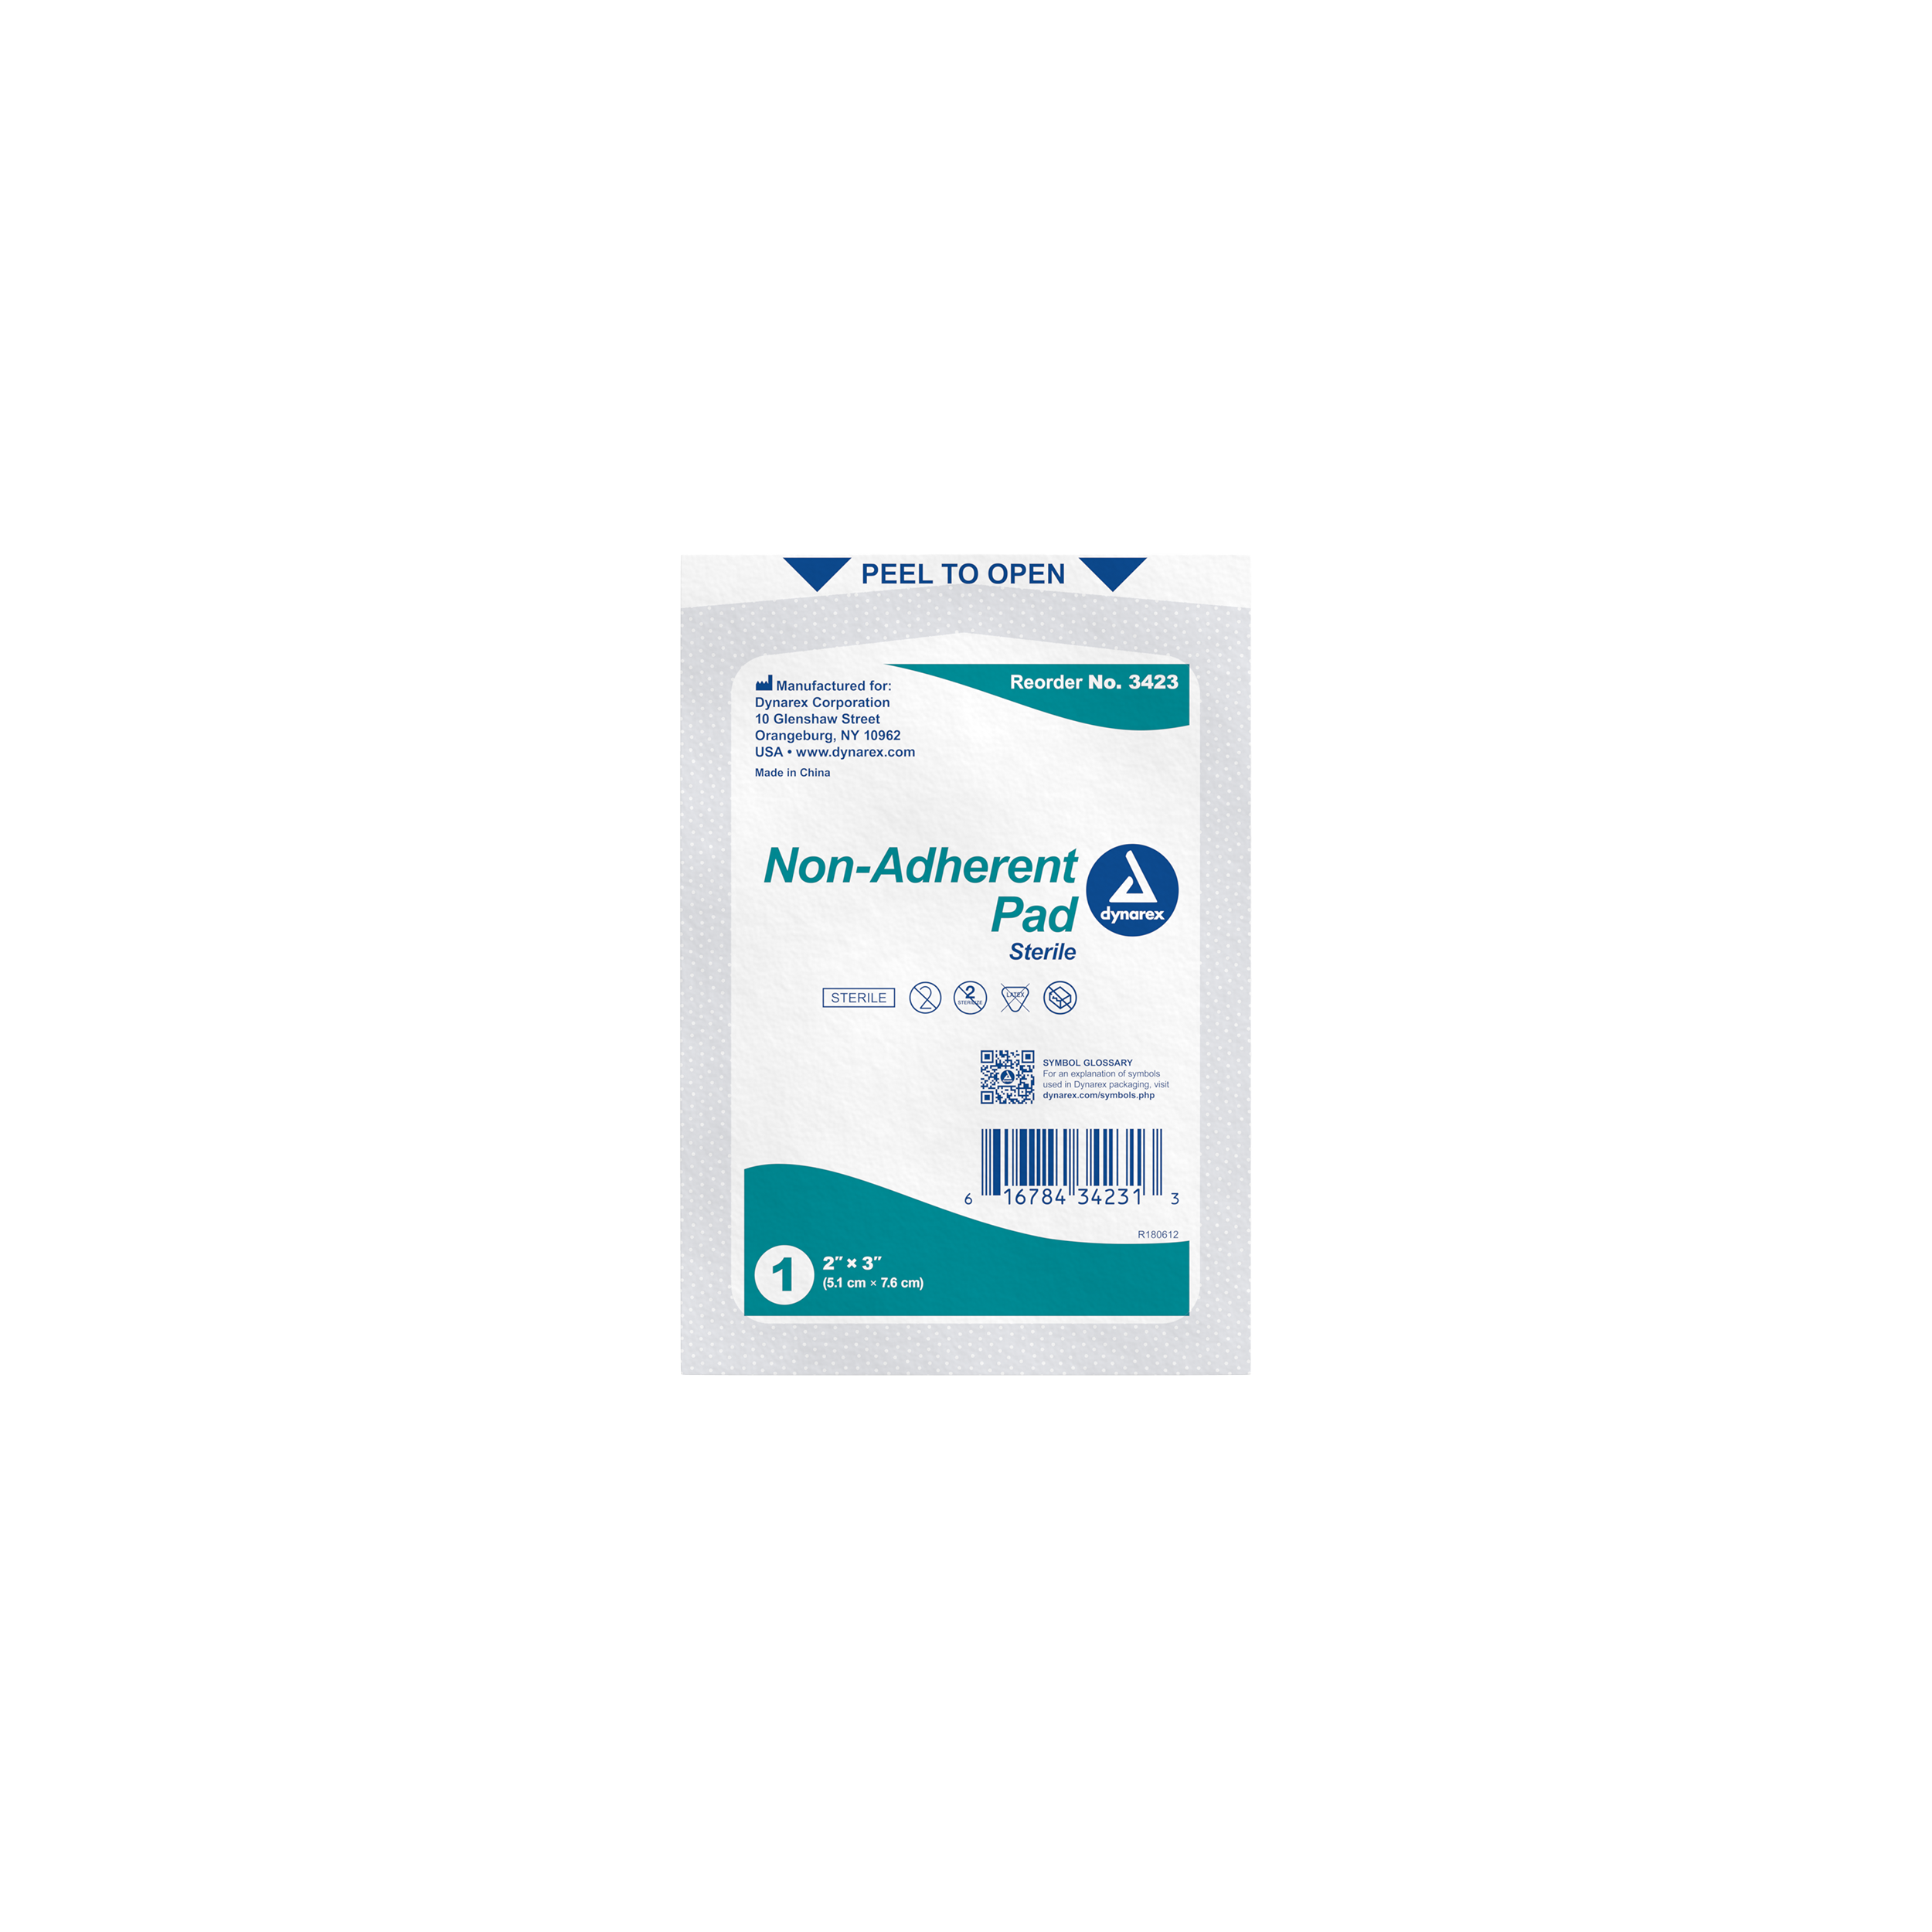 Non-adherent Pads Sterile - 2